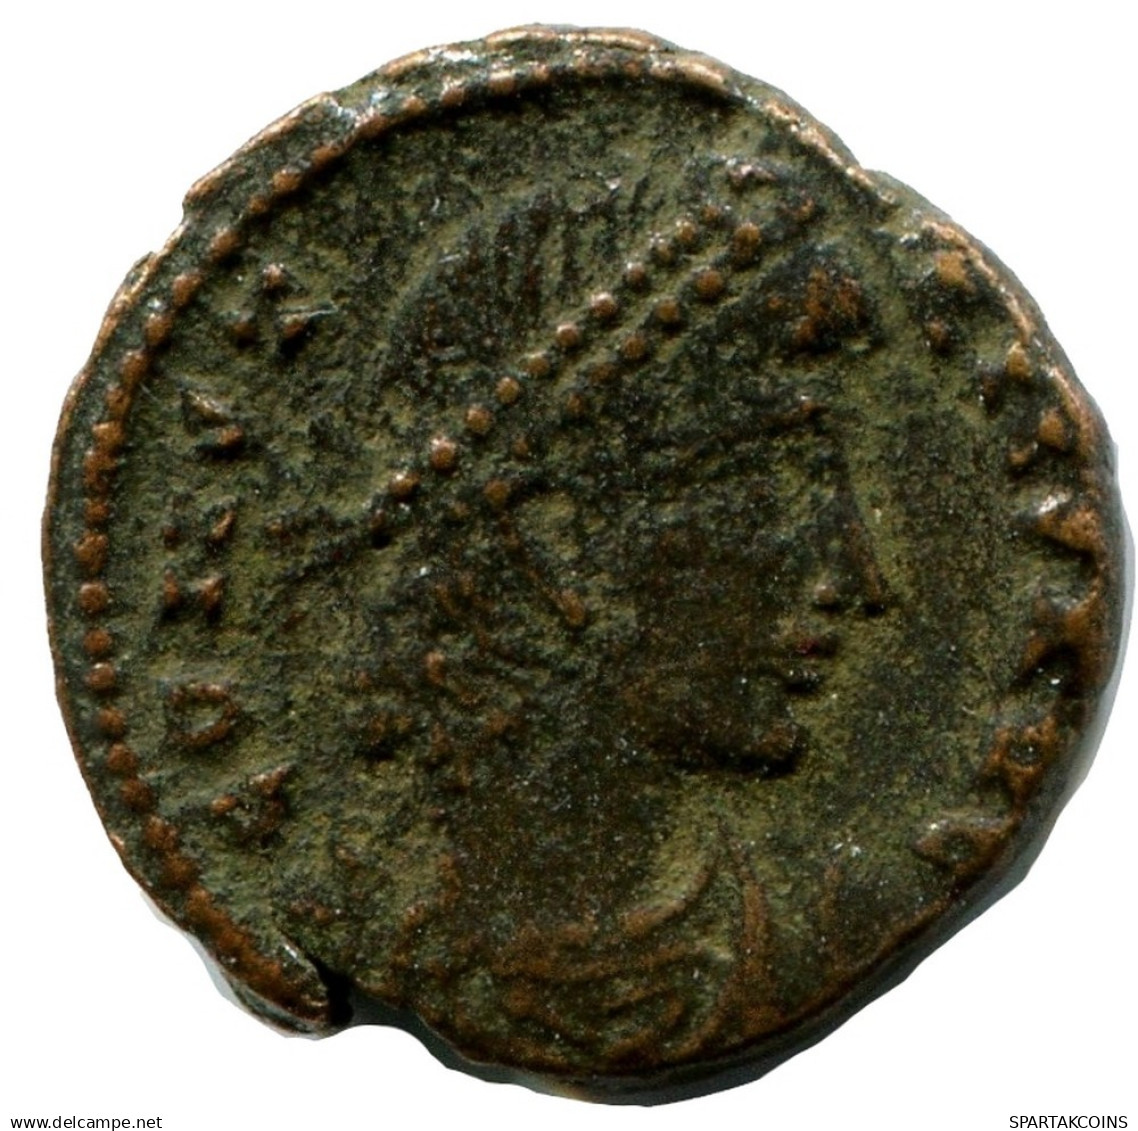 CONSTANS MINTED IN ALEKSANDRIA FOUND IN IHNASYAH HOARD EGYPT #ANC11466.14.D.A - El Imperio Christiano (307 / 363)